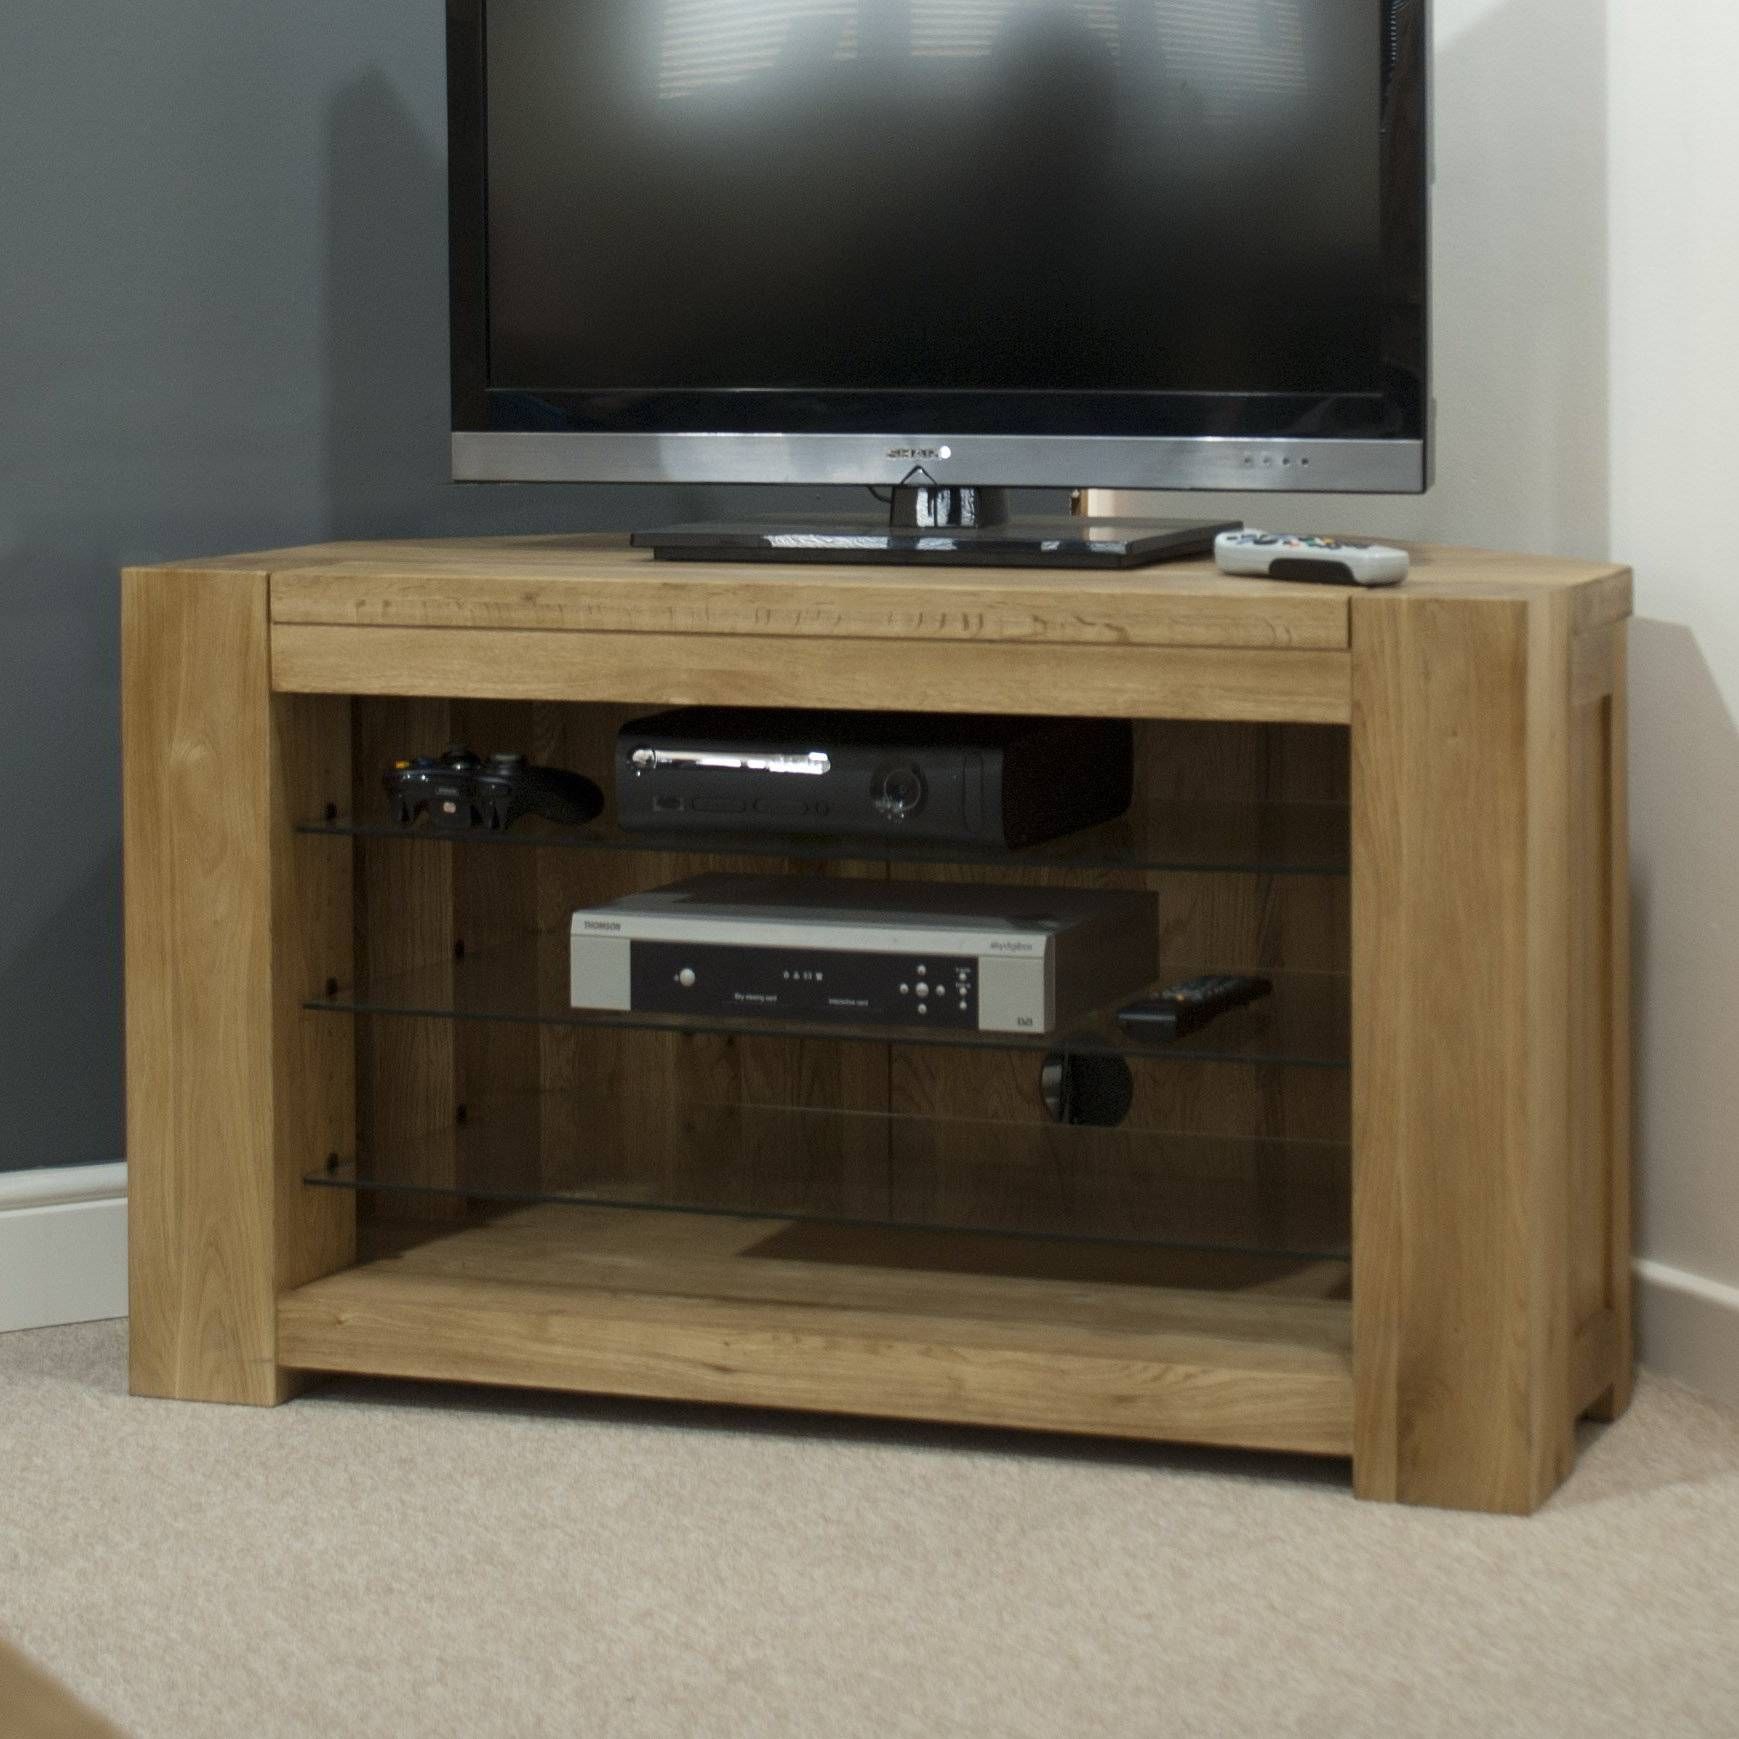 Padova Solid Oak Furniture Corner Television Cabinet Stand Unit | Ebay In Solid Wood Corner Tv Cabinets (View 13 of 15)